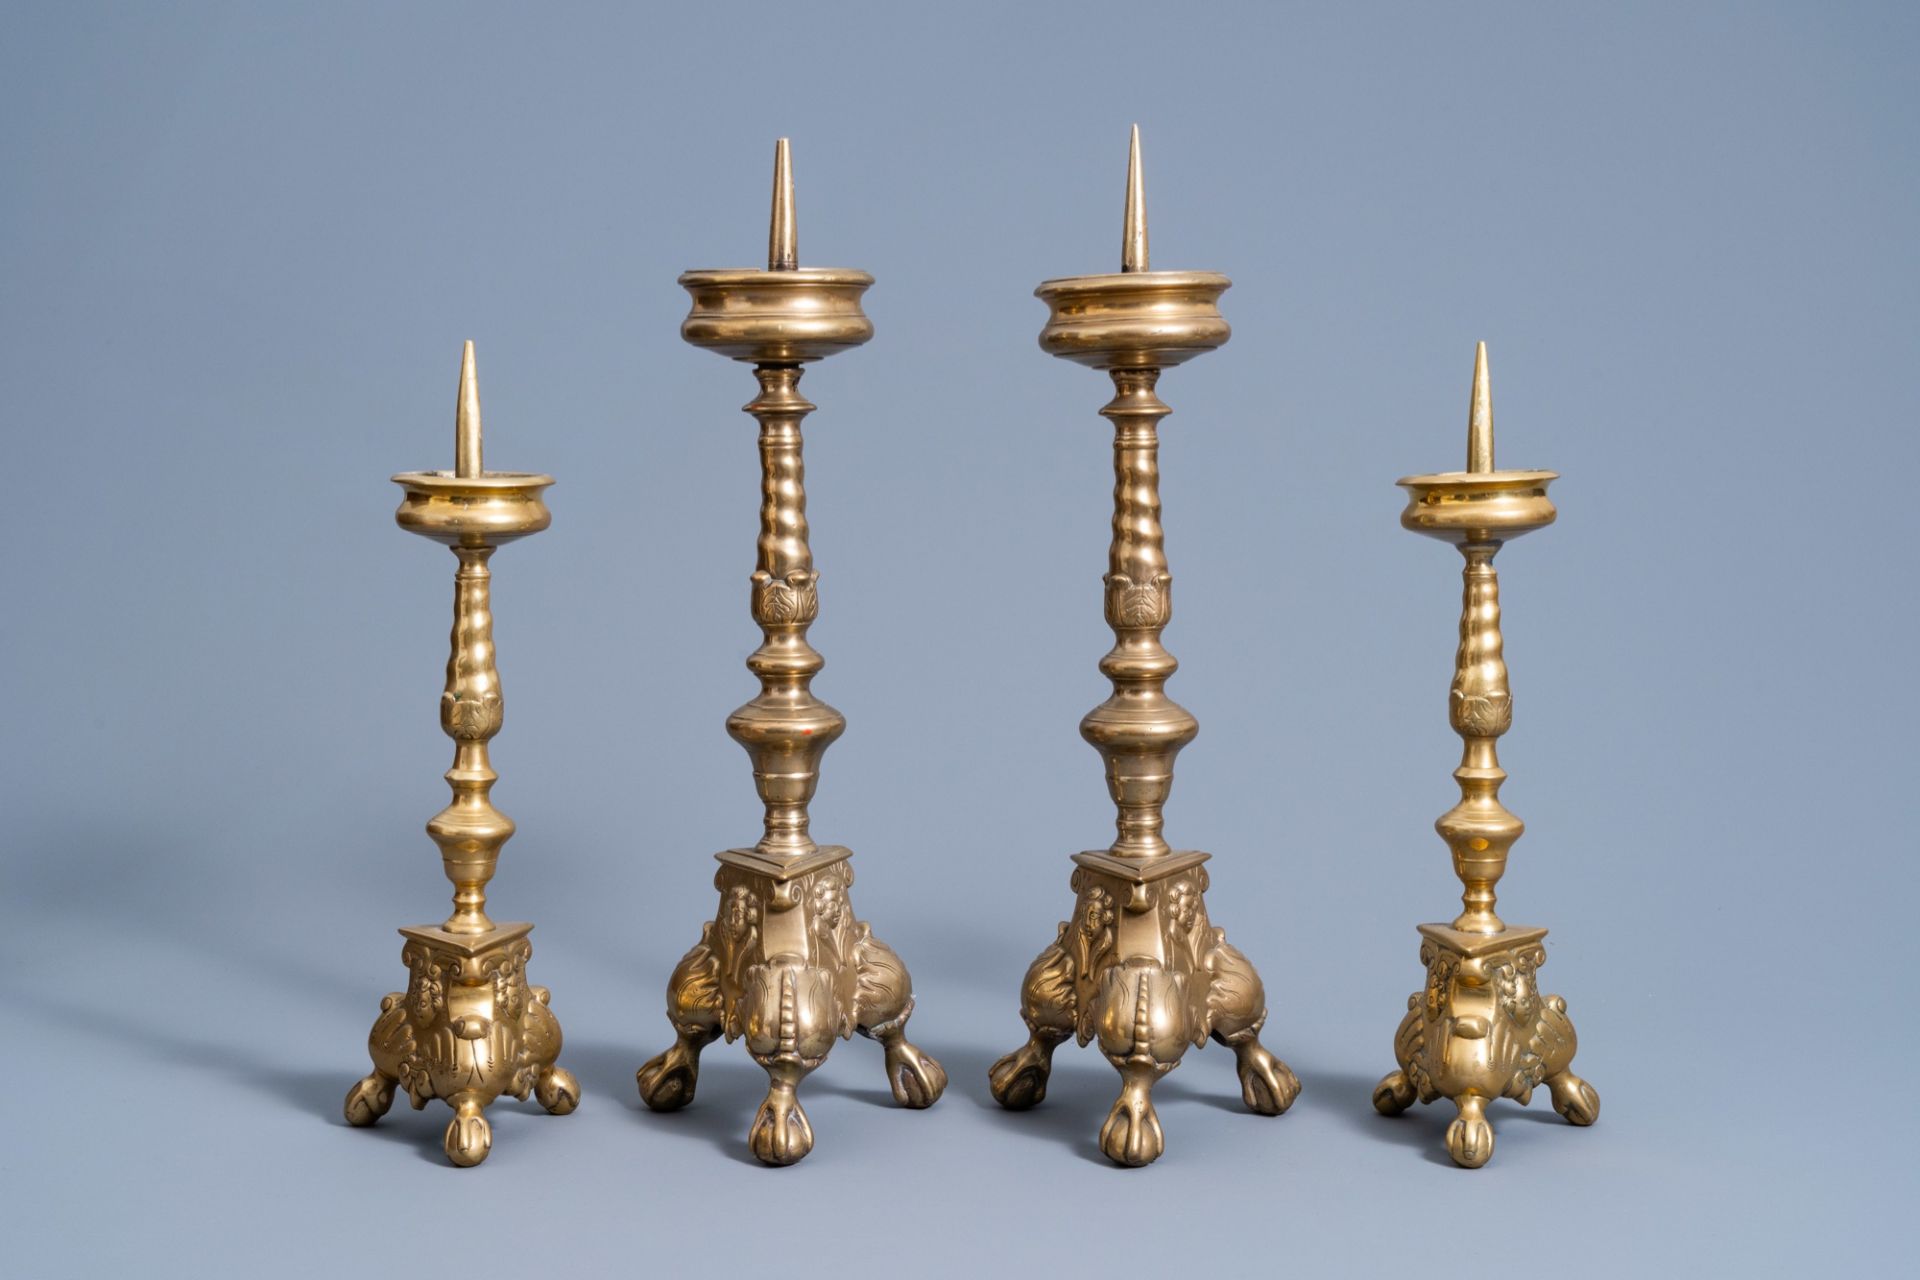 Two pairs of bronze pricket candlesticks, Flanders or The Netherlands, 17th C. - Image 5 of 7